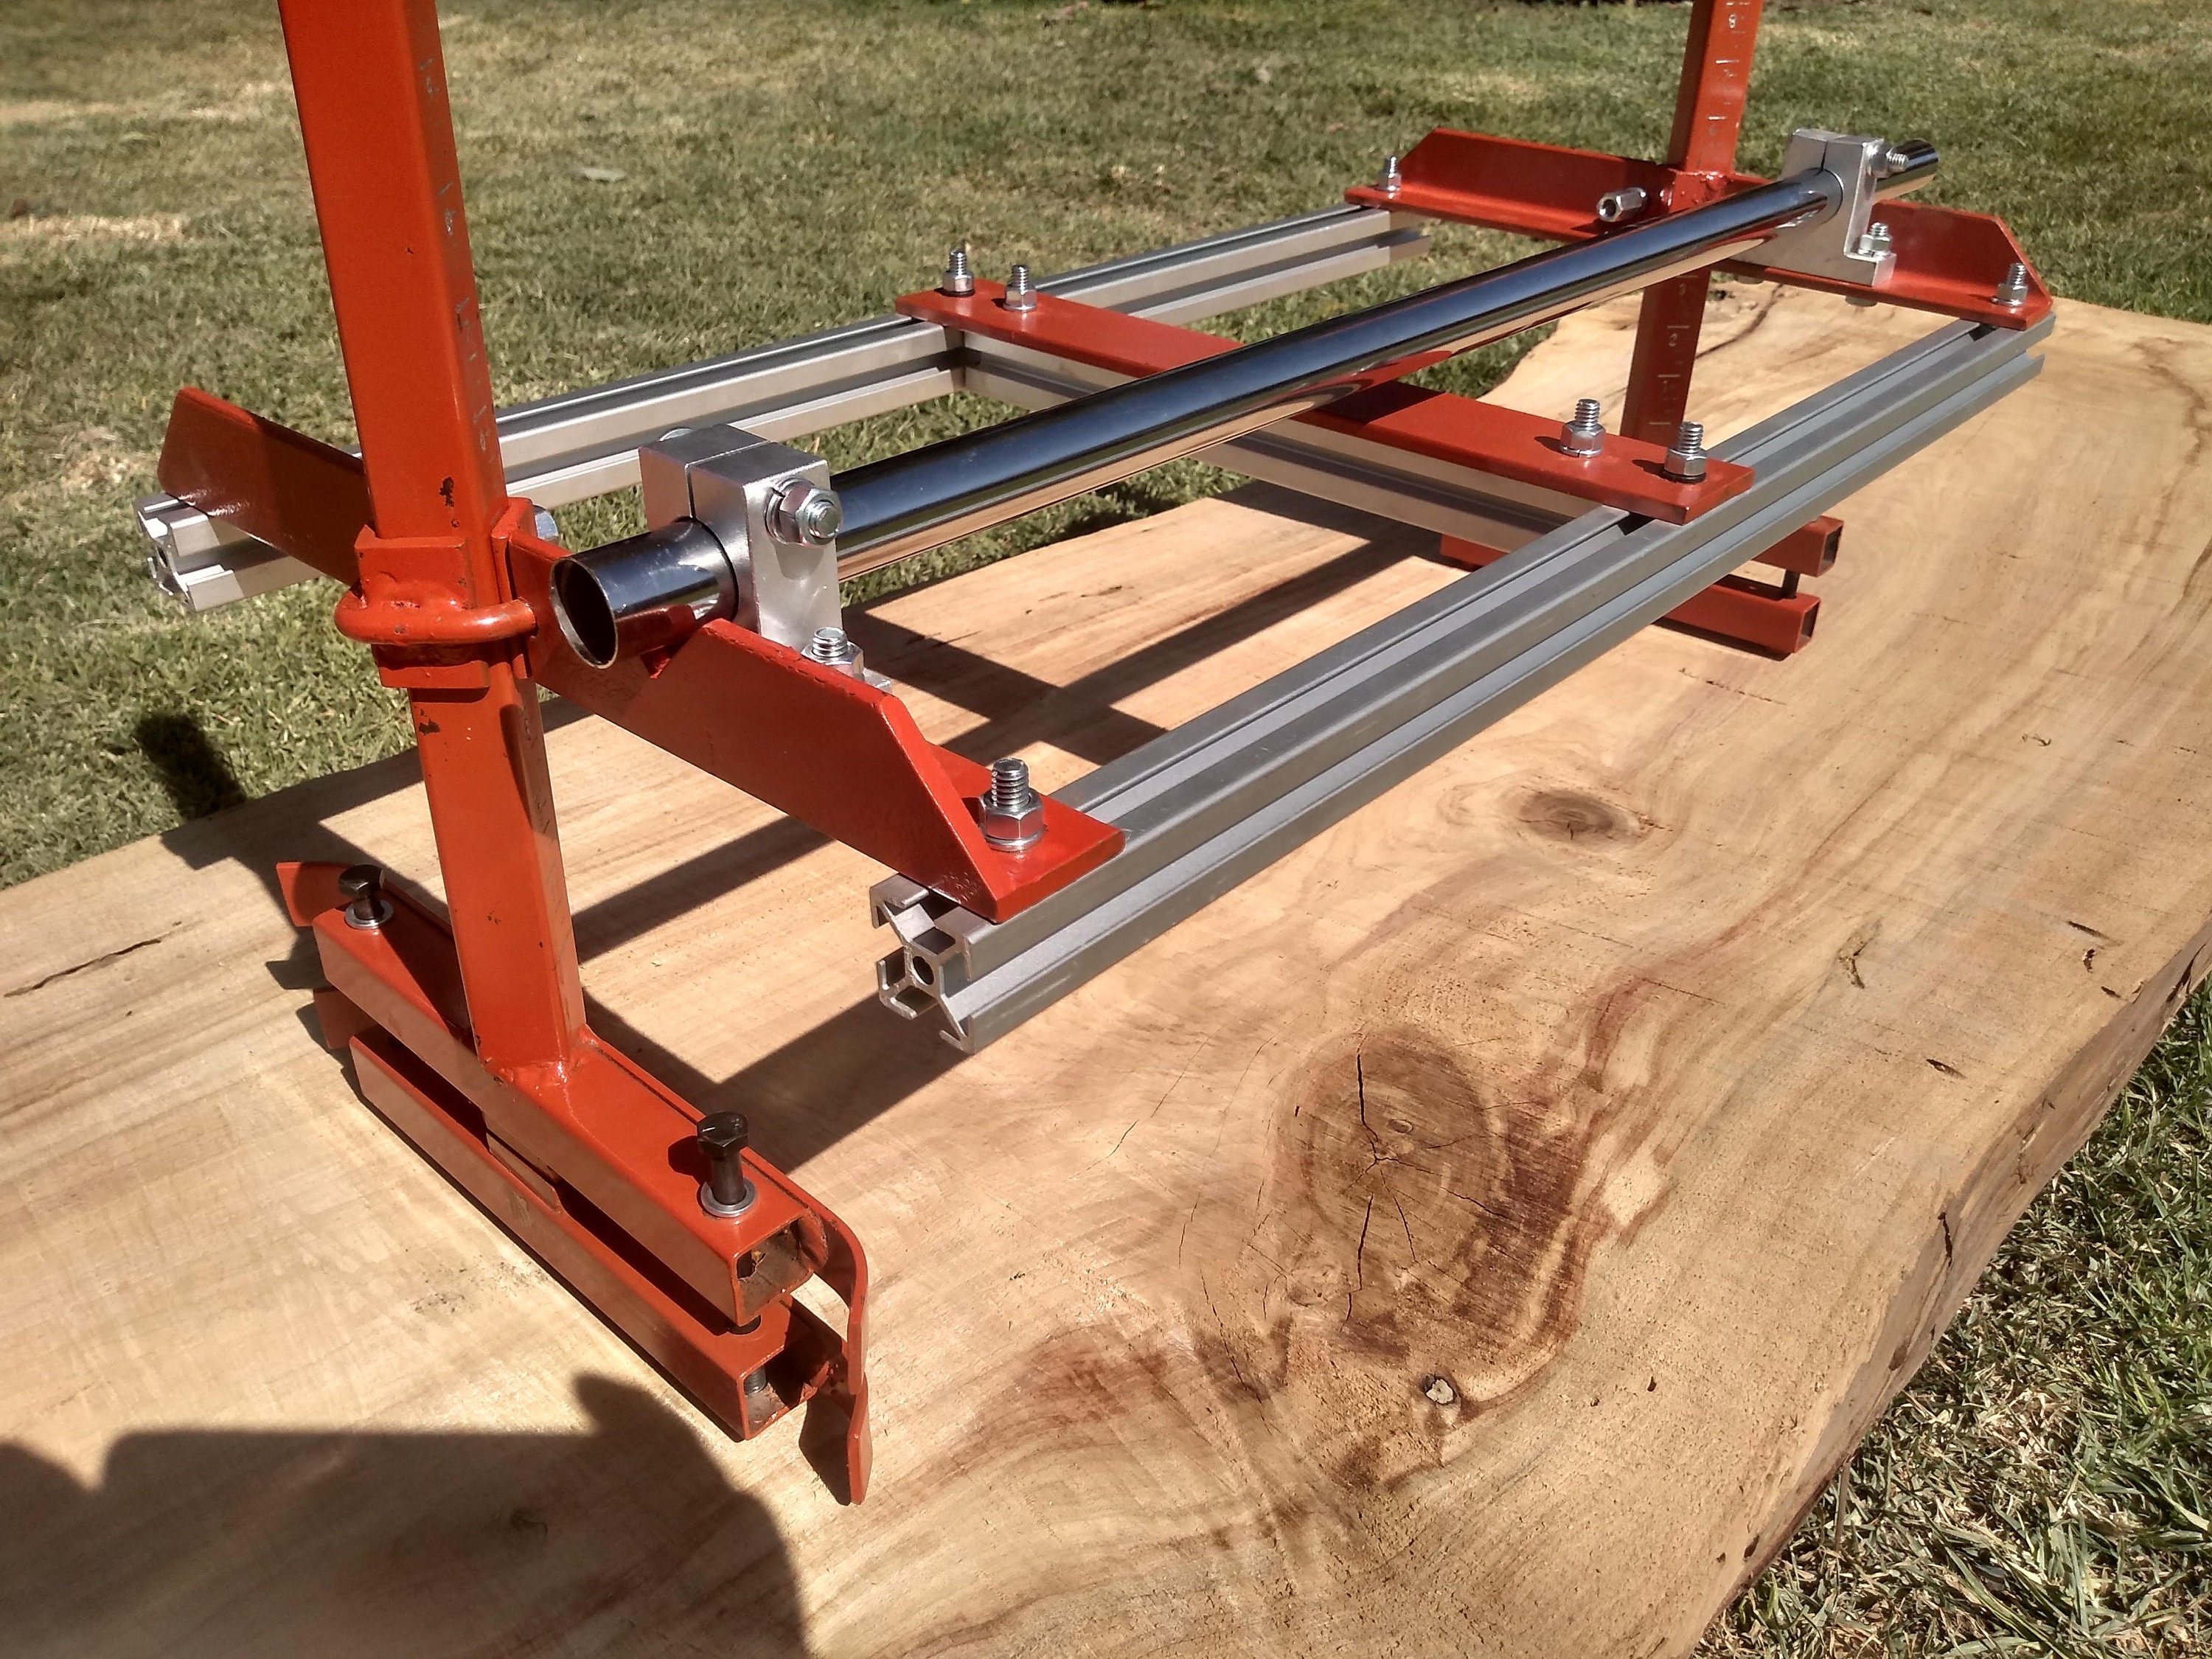 3. Timberking Sawmill for Sale by Owner on Craigslist - wide 3